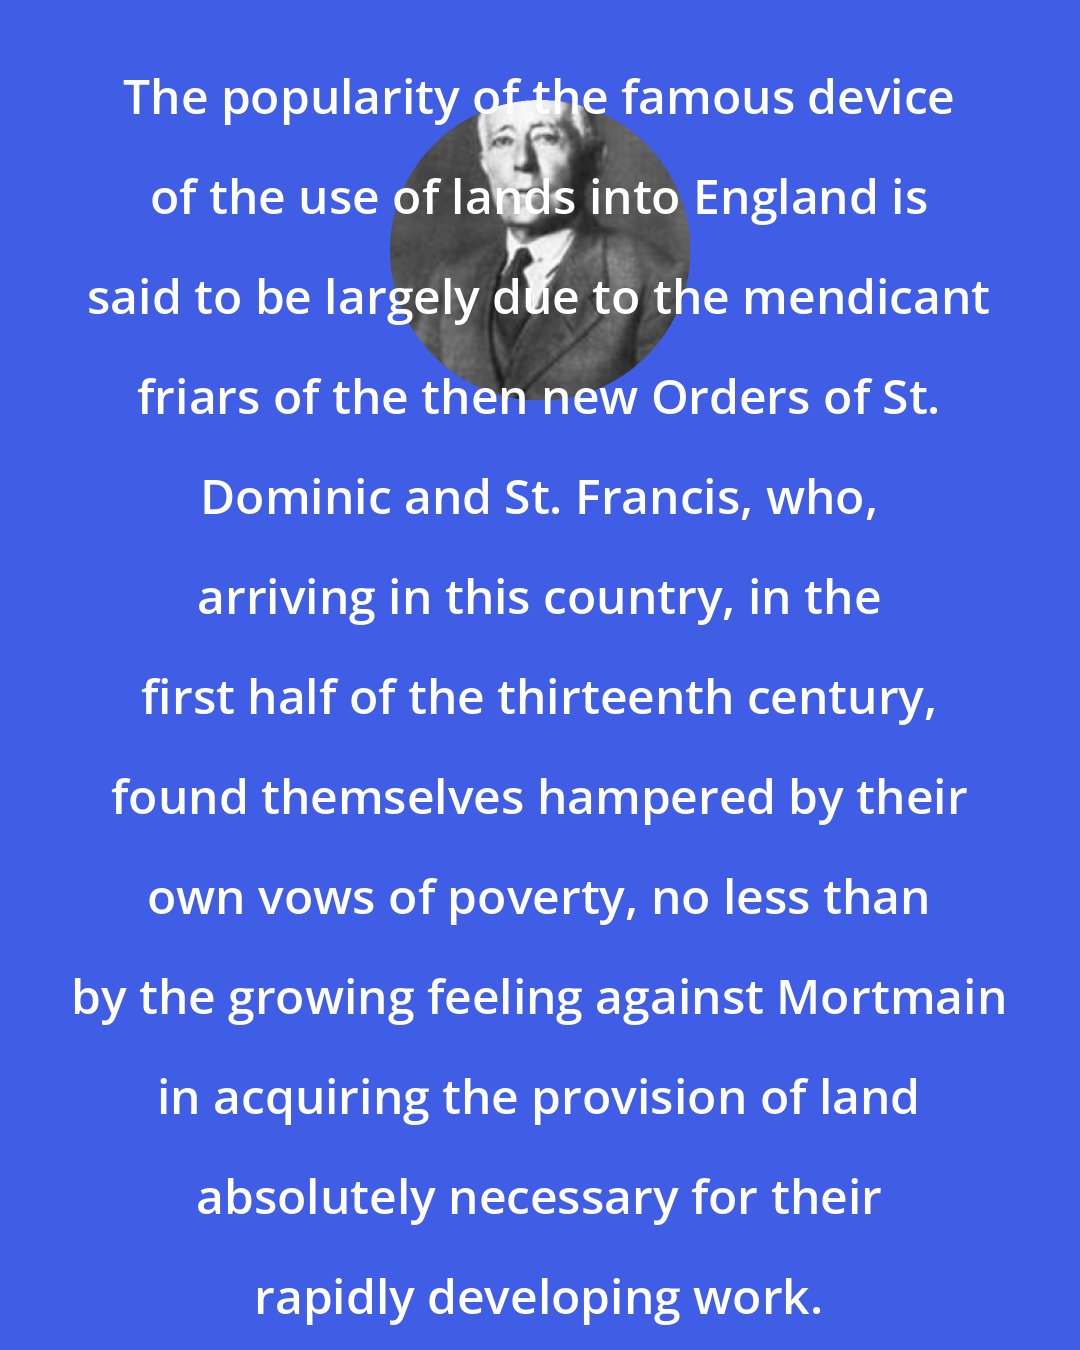 Edward Jenks: The popularity of the famous device of the use of lands into England is said to be largely due to the mendicant friars of the then new Orders of St. Dominic and St. Francis, who, arriving in this country, in the first half of the thirteenth century, found themselves hampered by their own vows of poverty, no less than by the growing feeling against Mortmain in acquiring the provision of land absolutely necessary for their rapidly developing work.